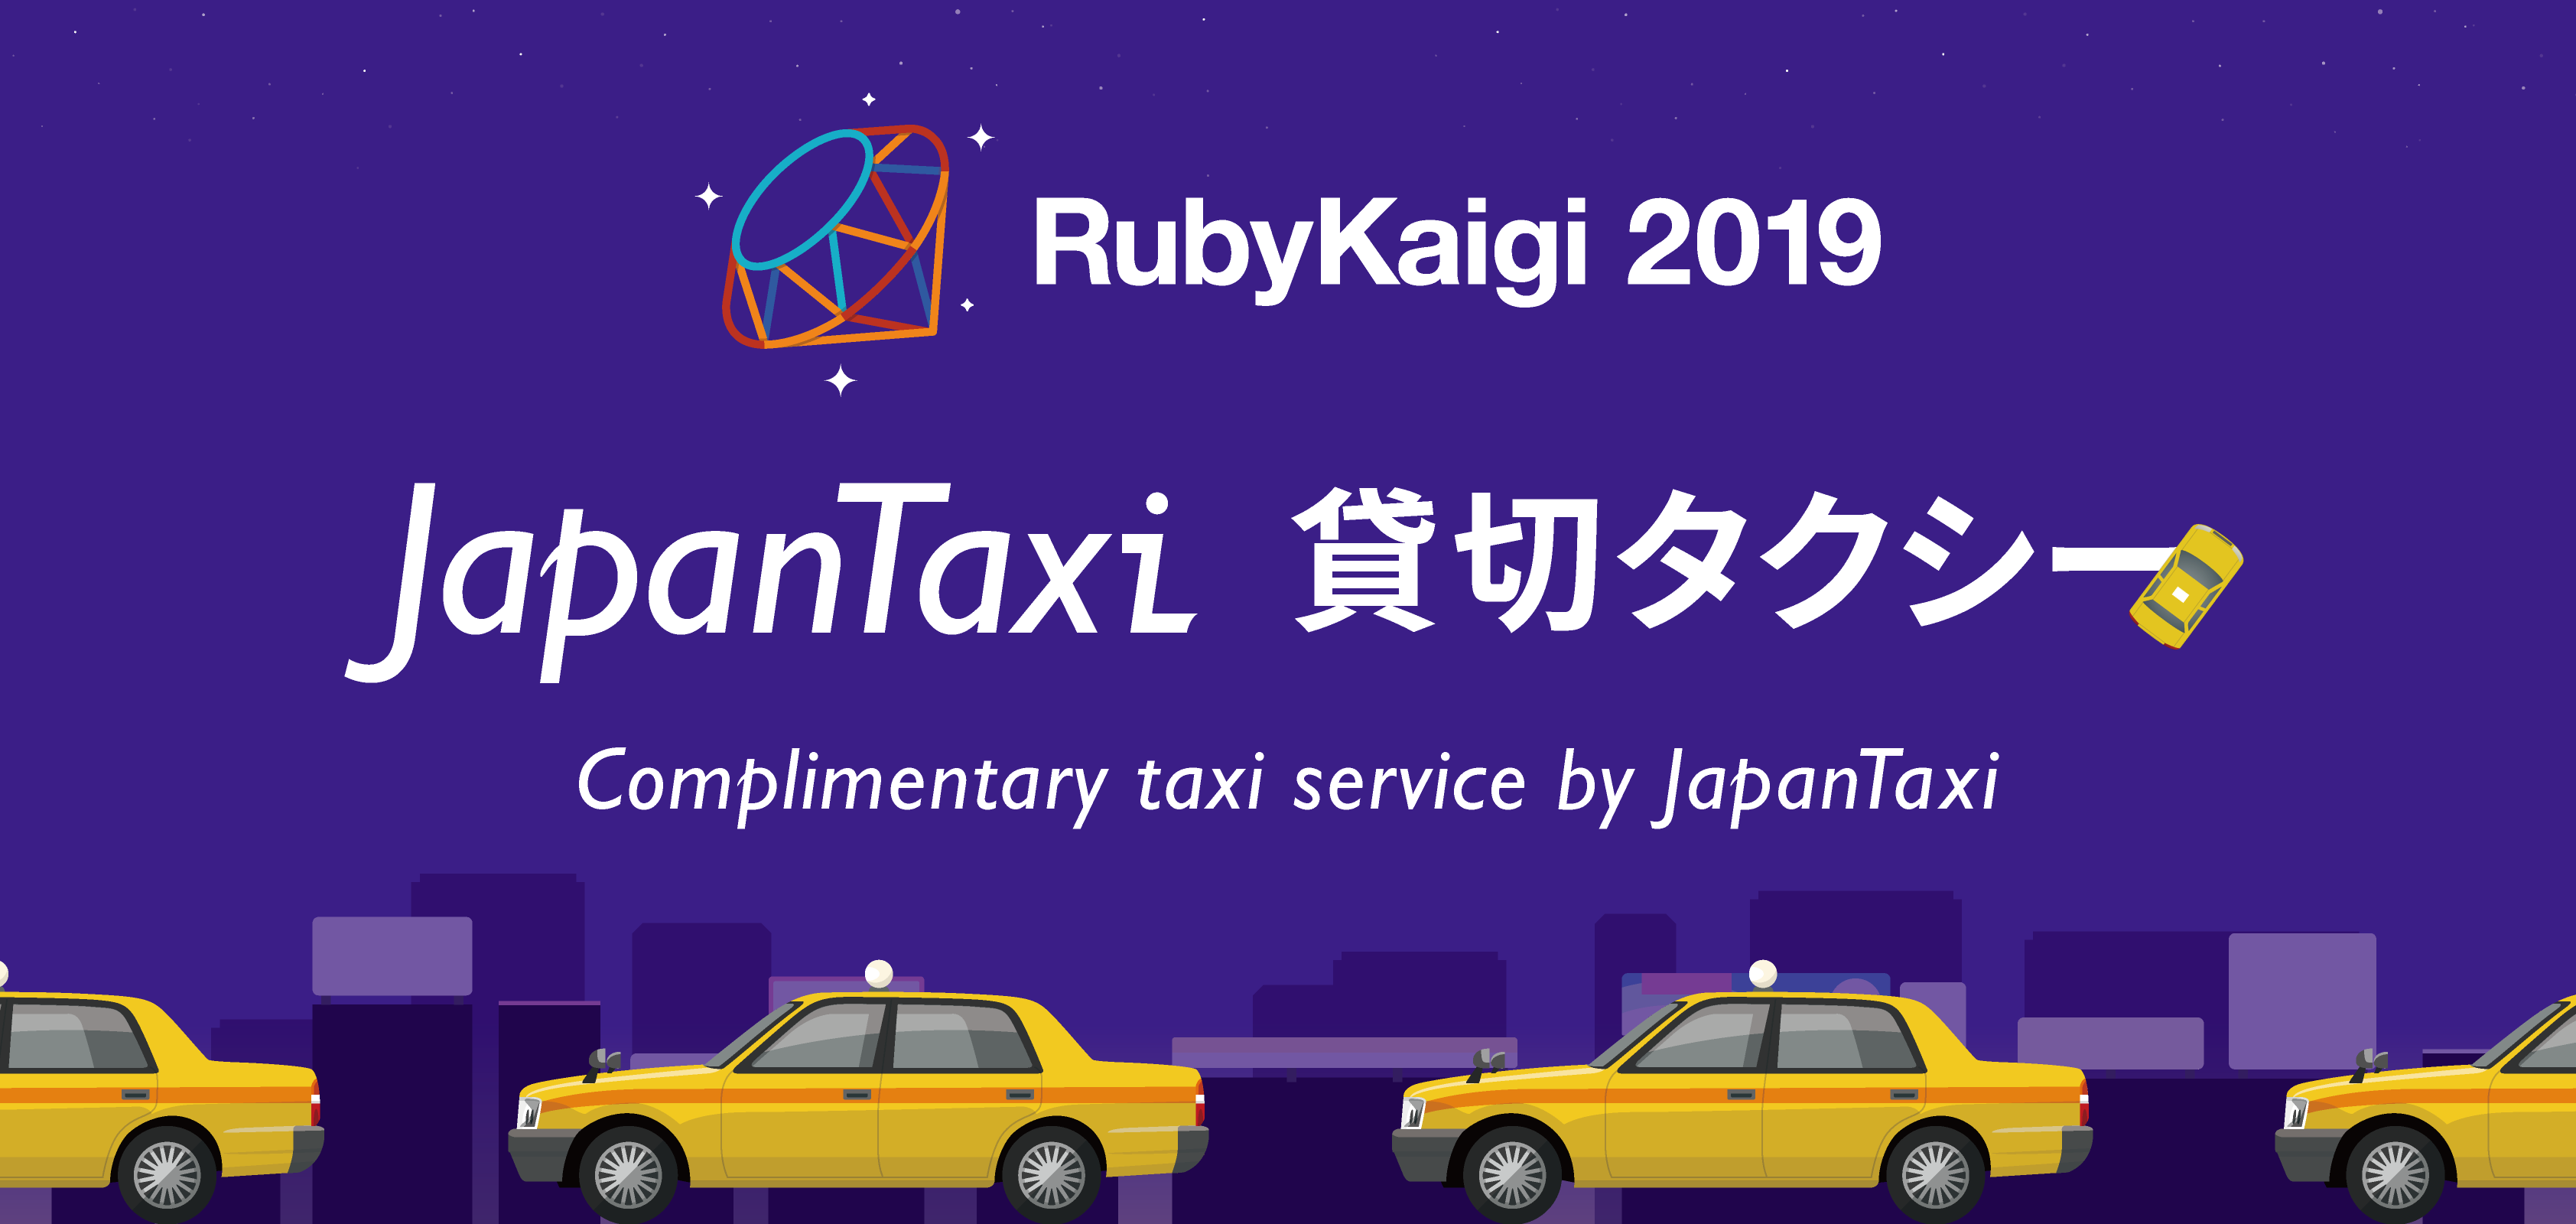 Complimentary Taxi Service by JapanTaxi